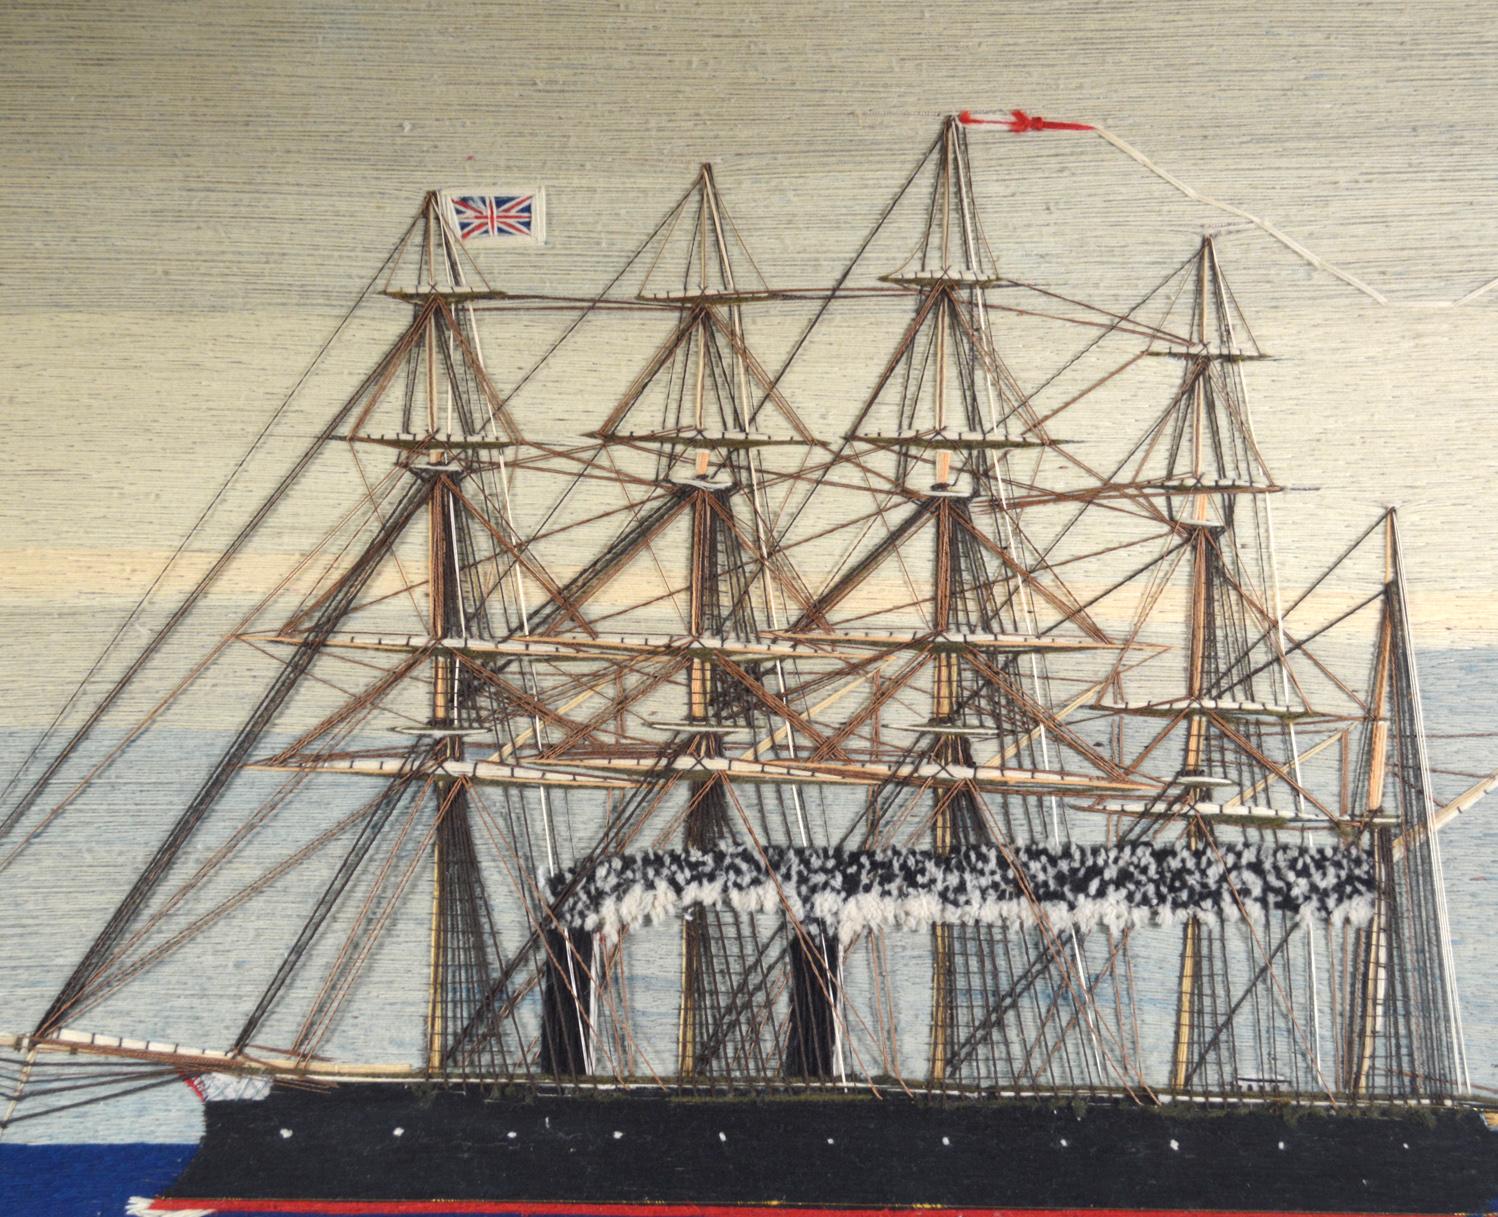 Sailor's Woolwork of Royal Navy Five-masted Ship under Steam, 
HMS Minotaur or HMS Agincourt,
Minotaur Class Broadside Ironclad,
circa 1880

The sailor's woolie depicts a portside view of a five-masted ship underway with steam, depicted as